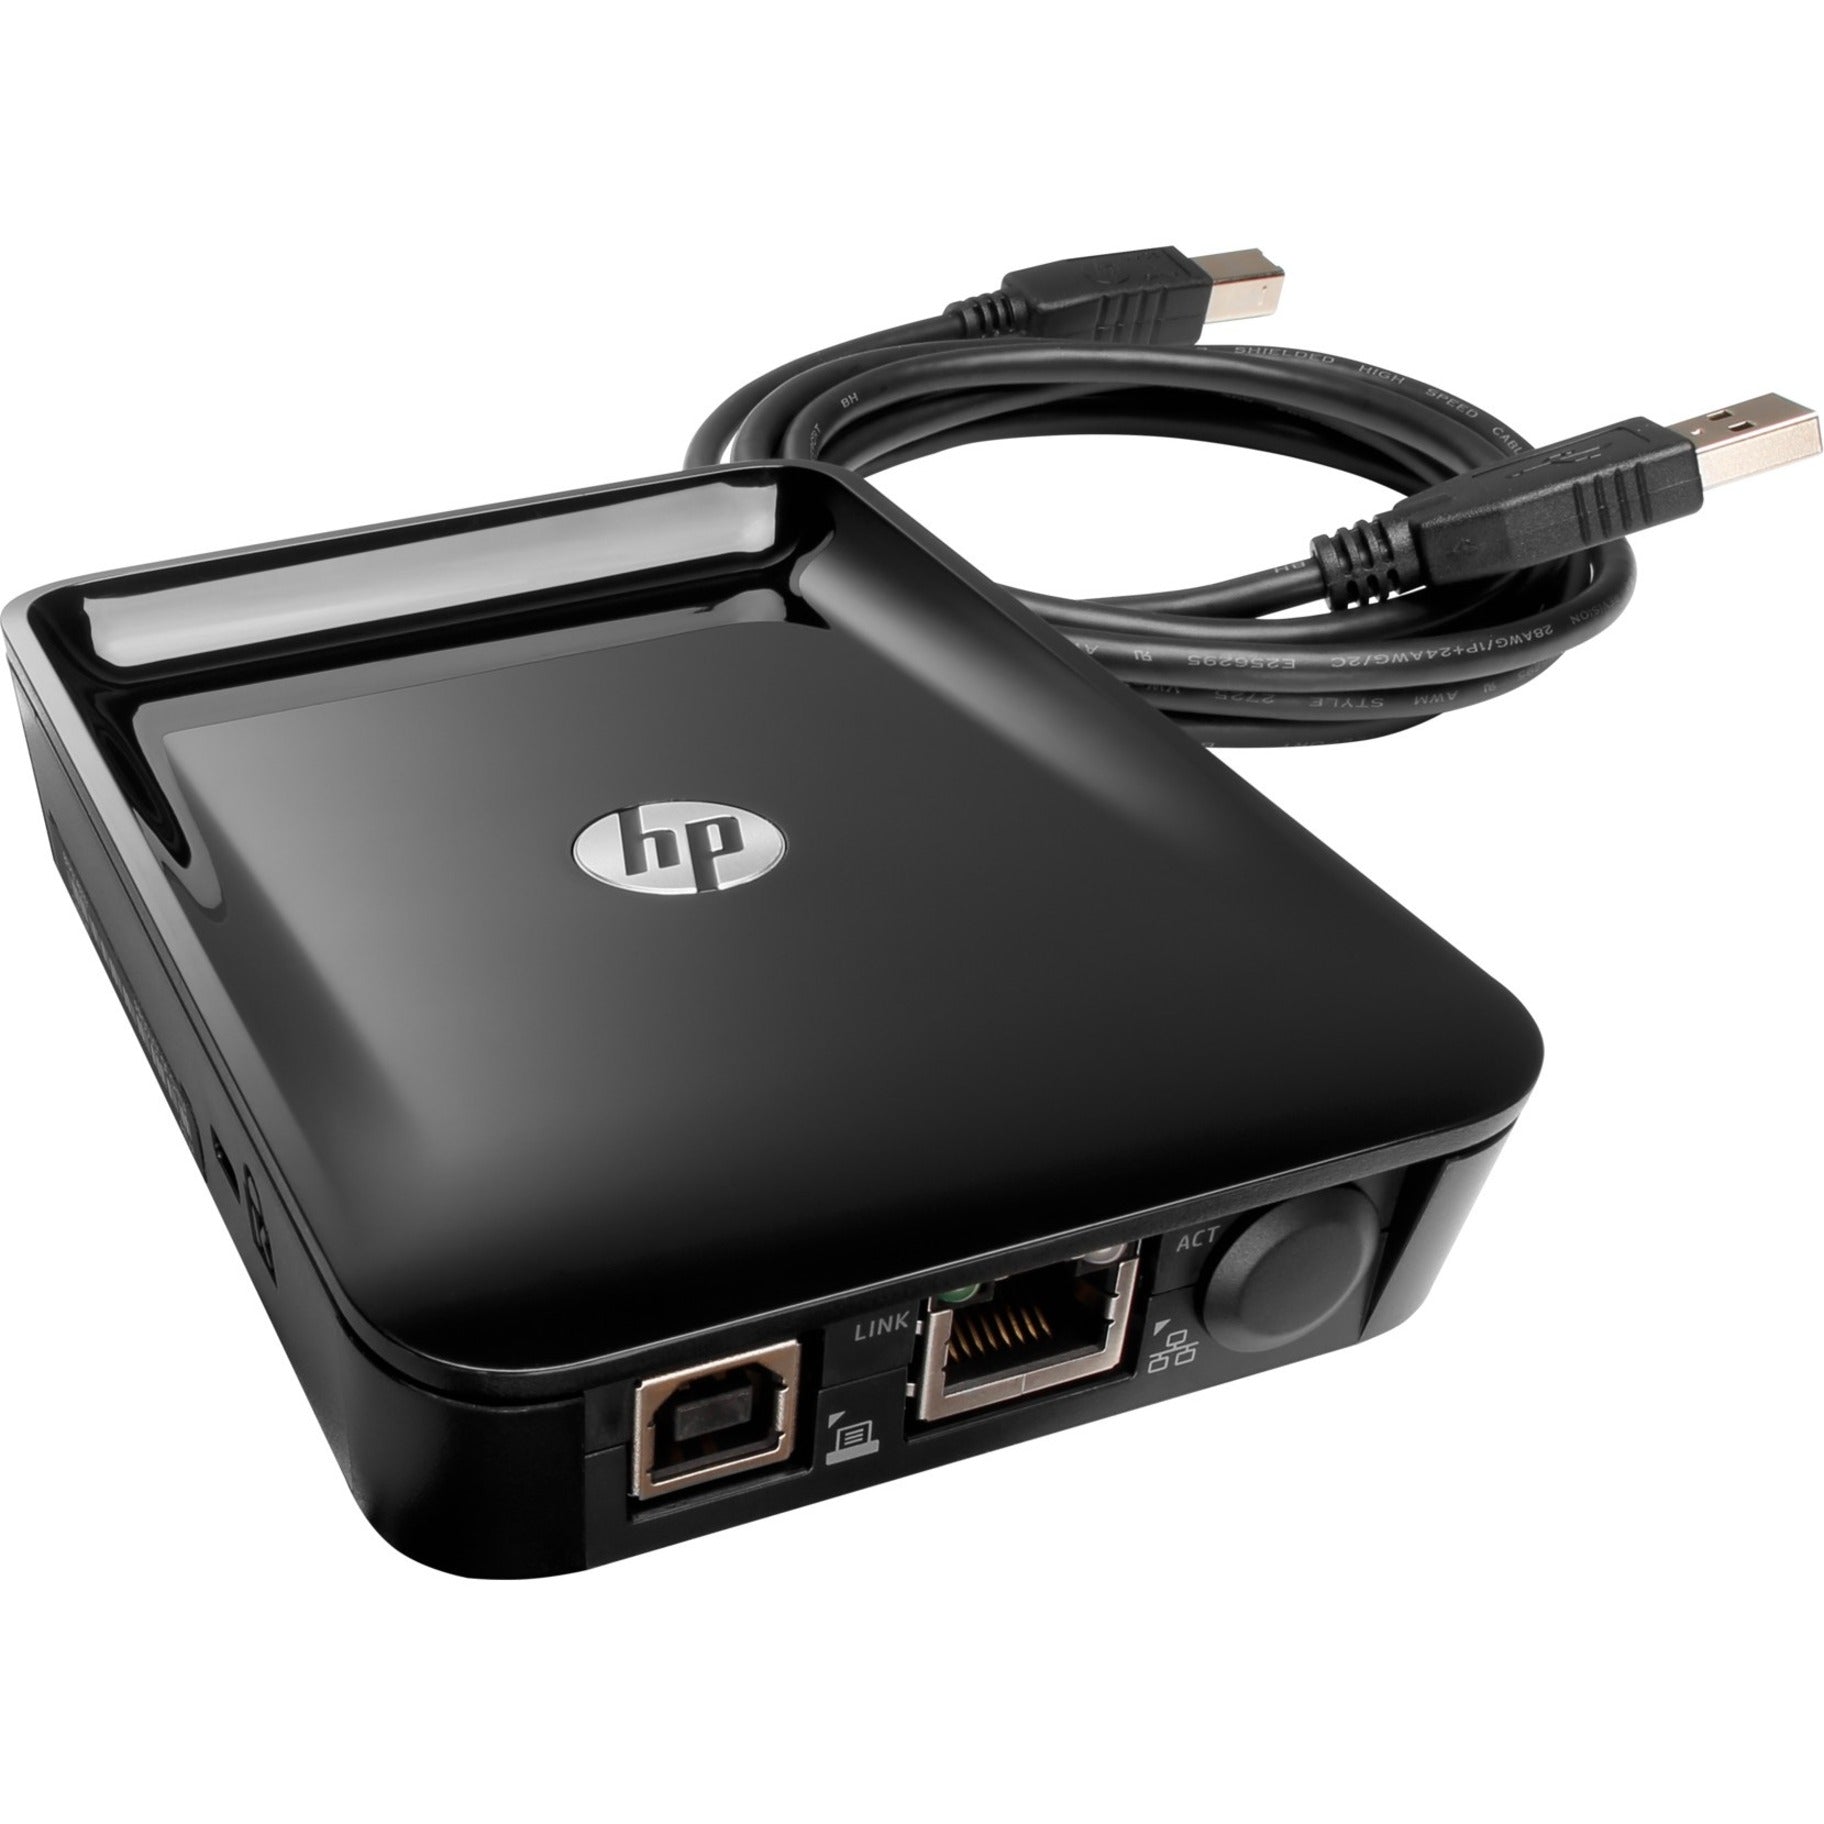 HP Jetdirect LAN Accessory (8FP31A)